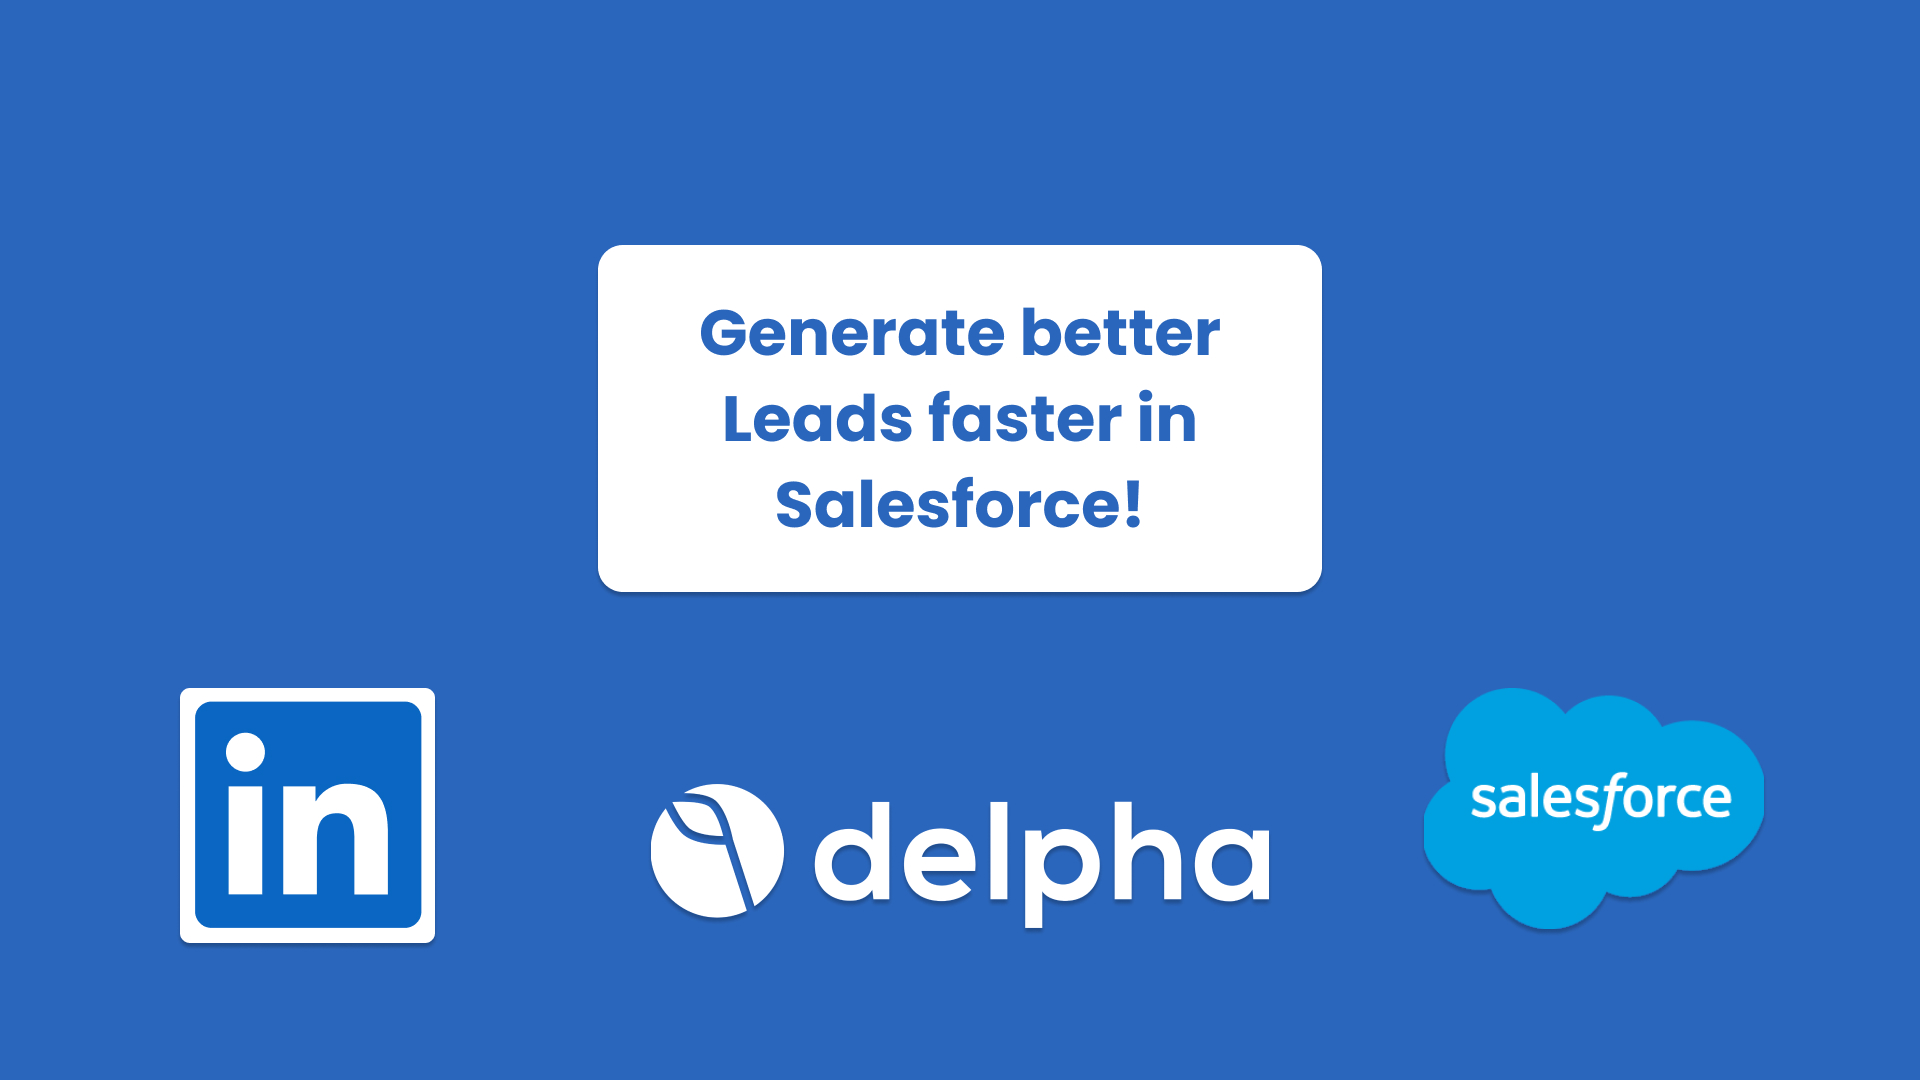 End users can download this Delpha conversation to enable those doing lead generation activities to get better data faster into Salesforce.